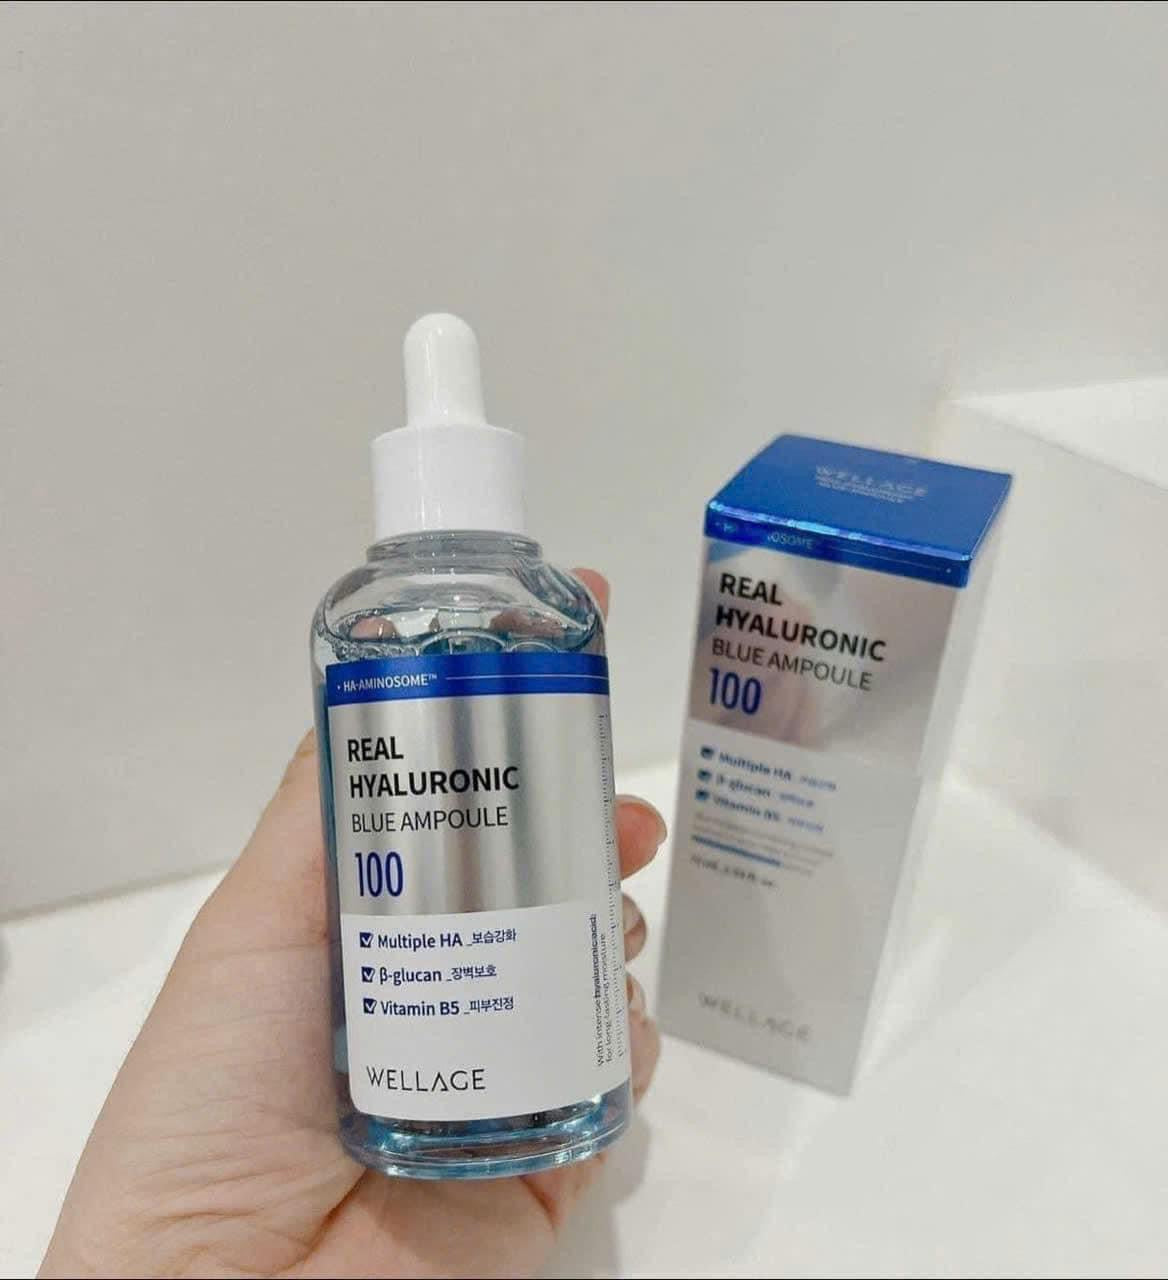 [Wellage] Real Hyaluronic Blue ampoule 100 100ml